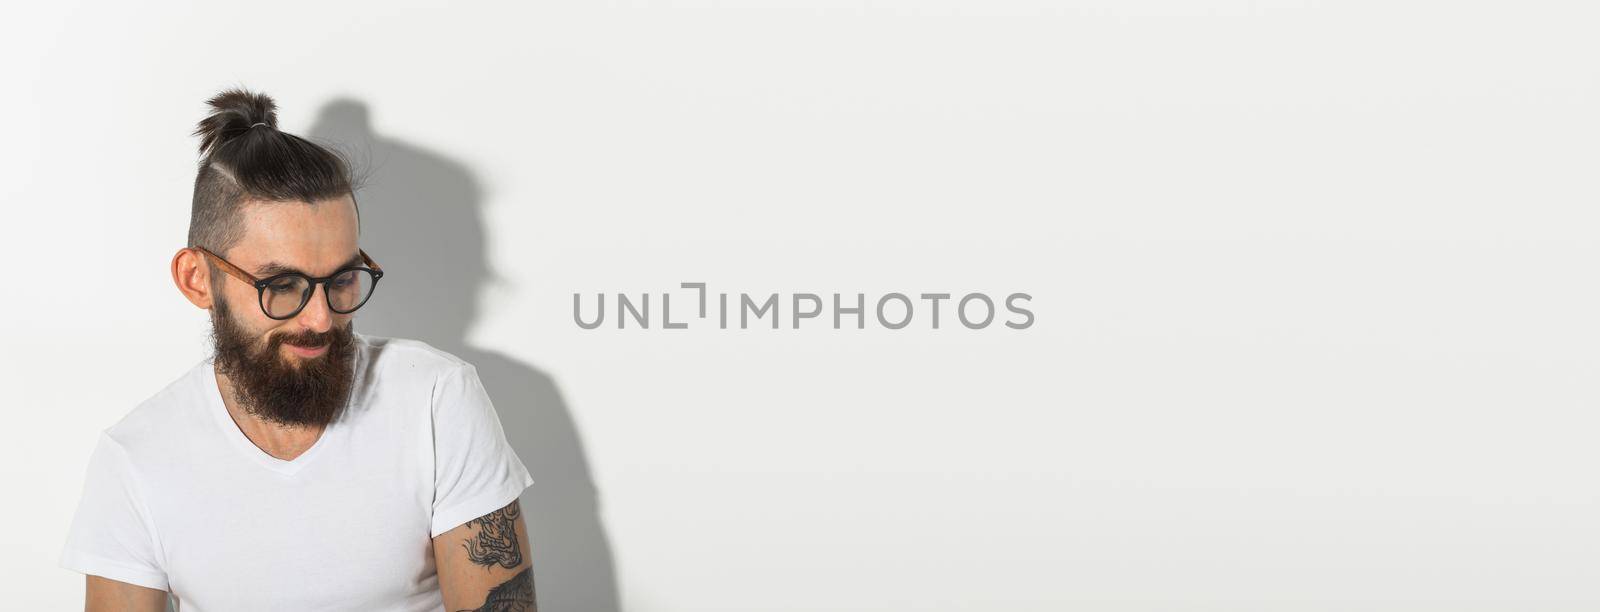 Beauty, fashion and people concept - Close up portrait of hipster man with beard over white background.